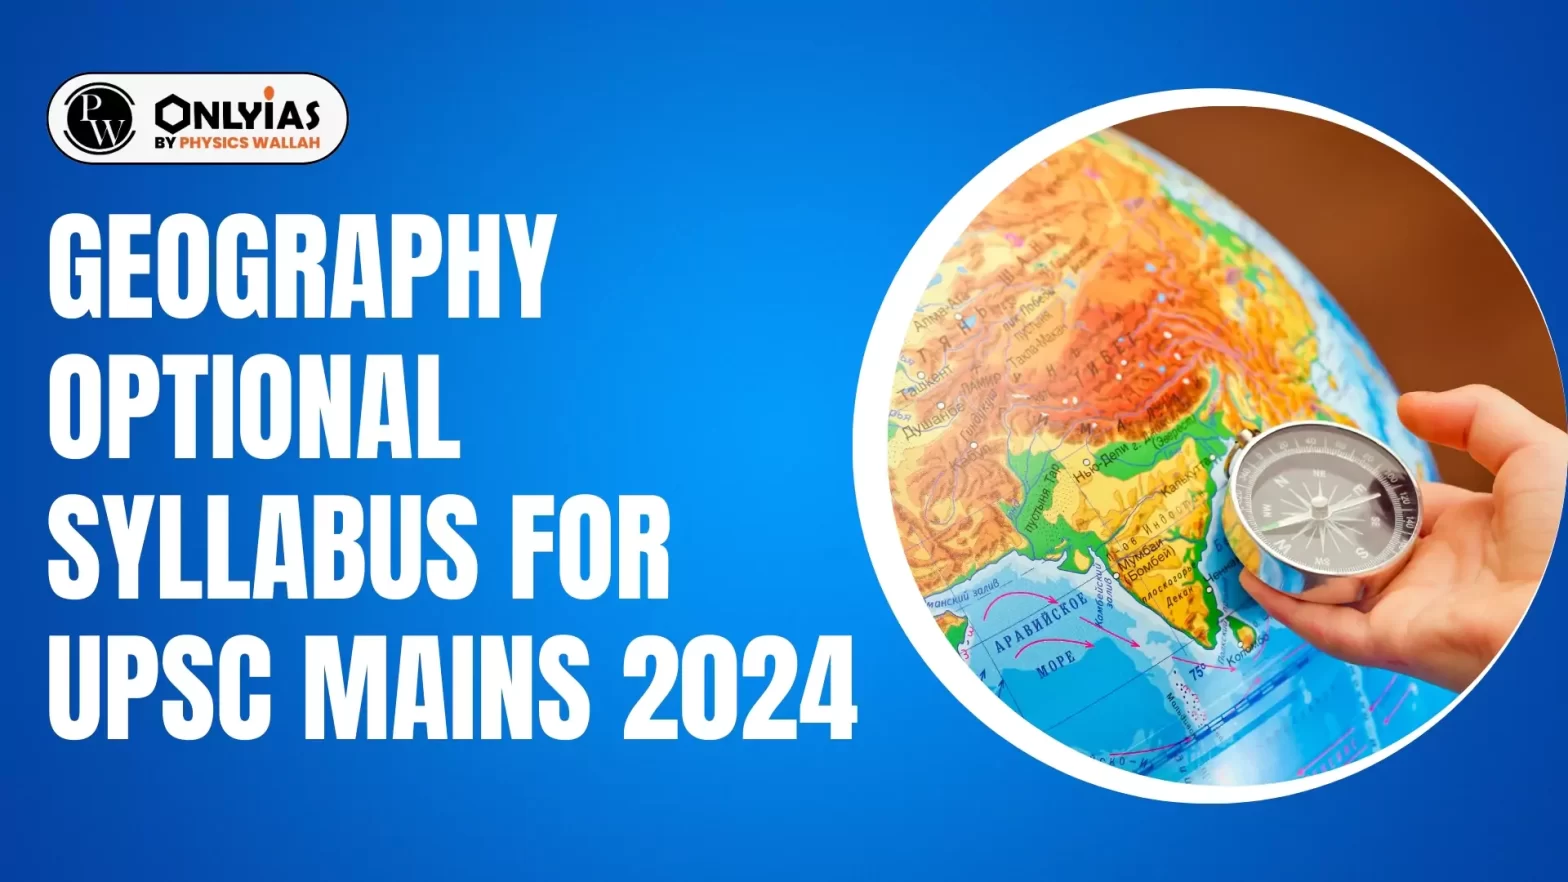 Geography Optional Syllabus for UPSC Mains 2024